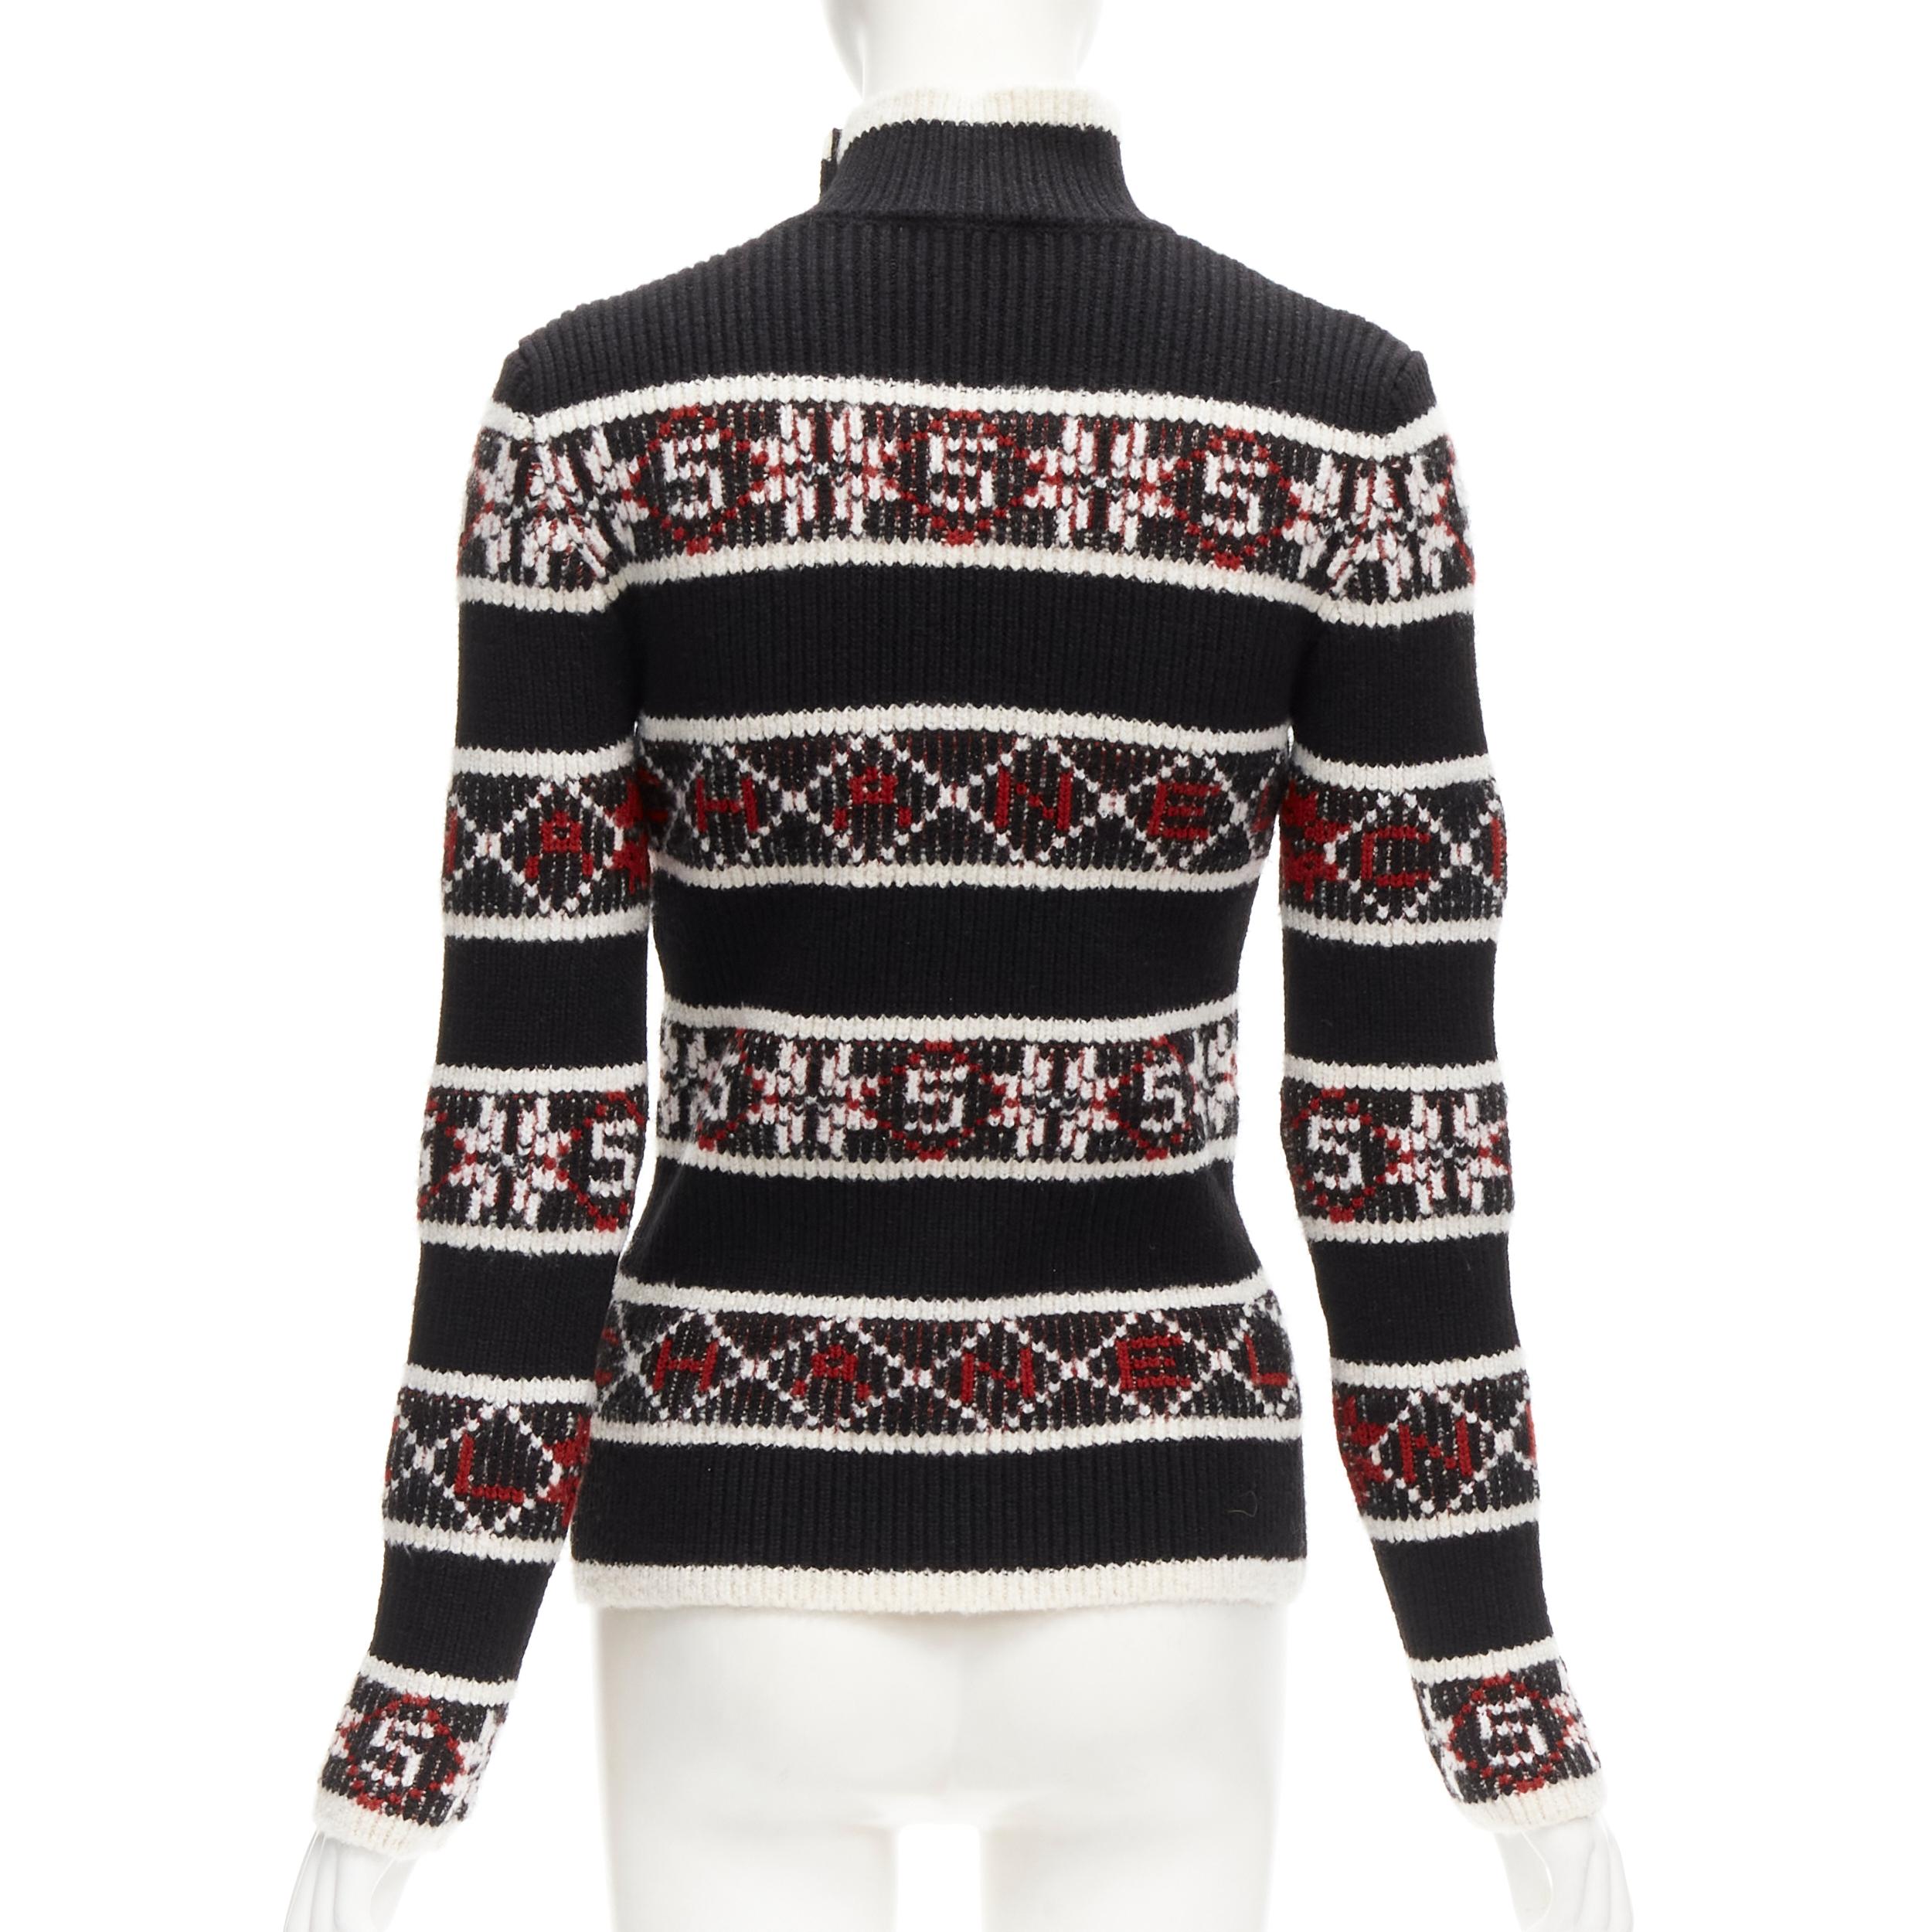 Women's new CHANEL CC buttons red black Snowflake 5 fair isle intarsia sweater FR36 S